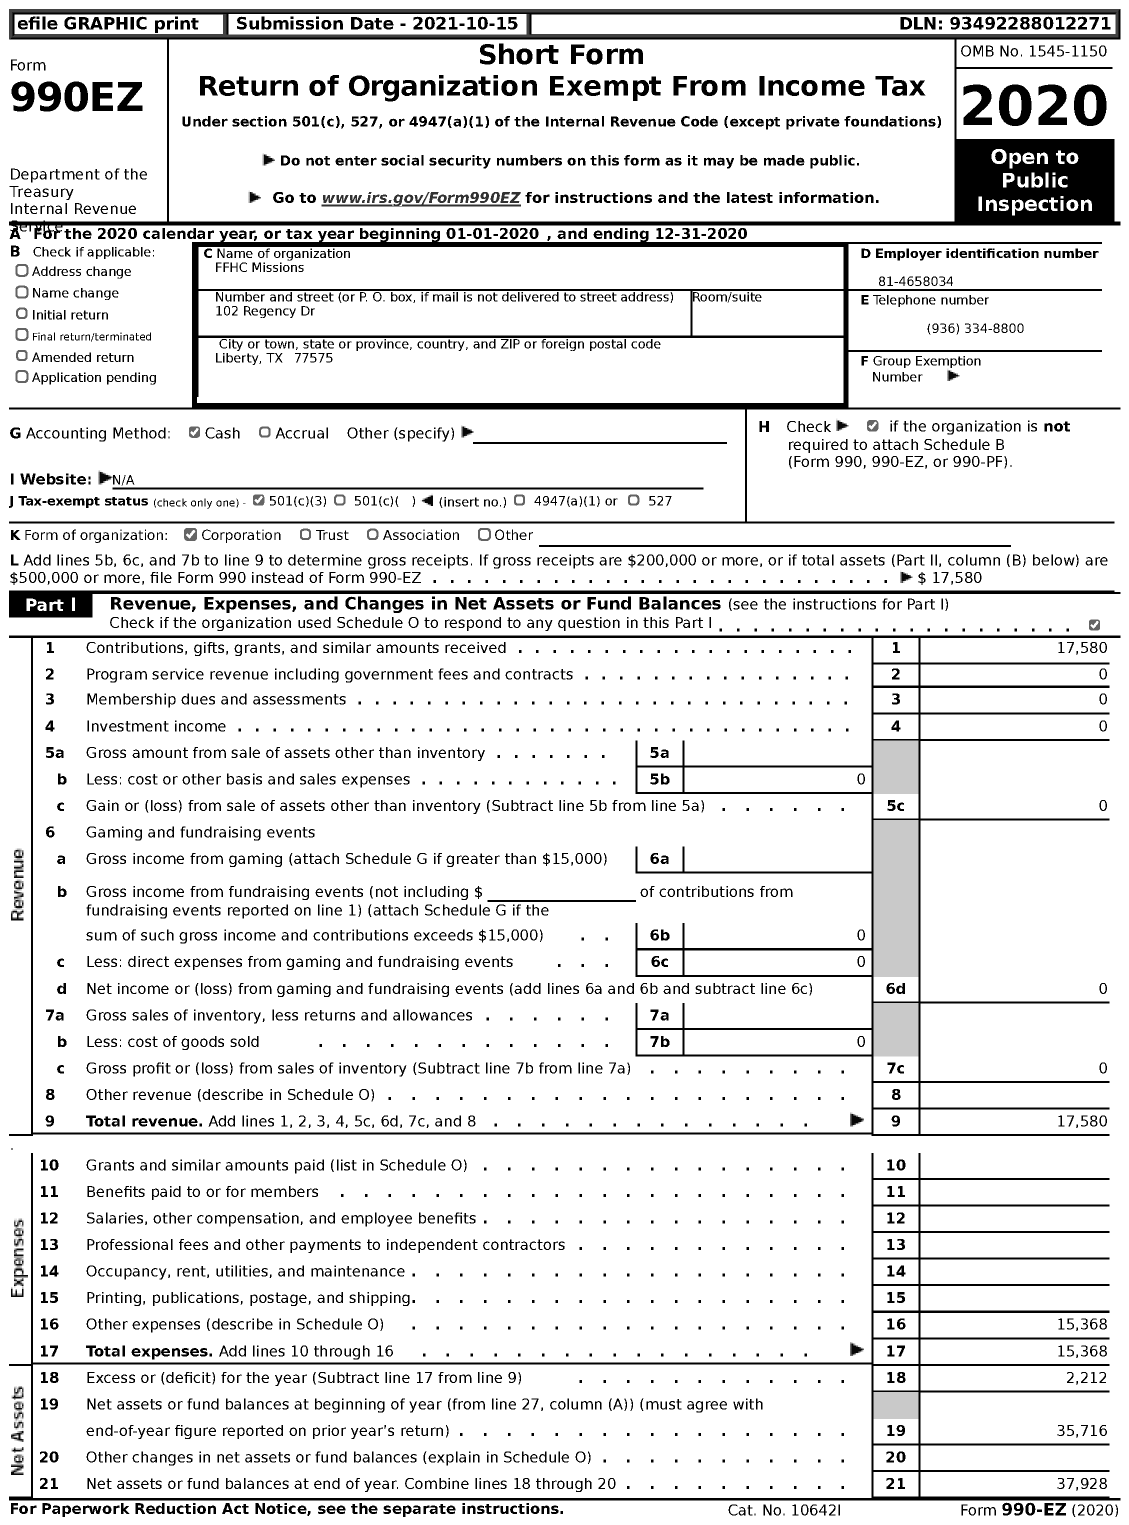 Image of first page of 2020 Form 990EZ for FFHC Missions